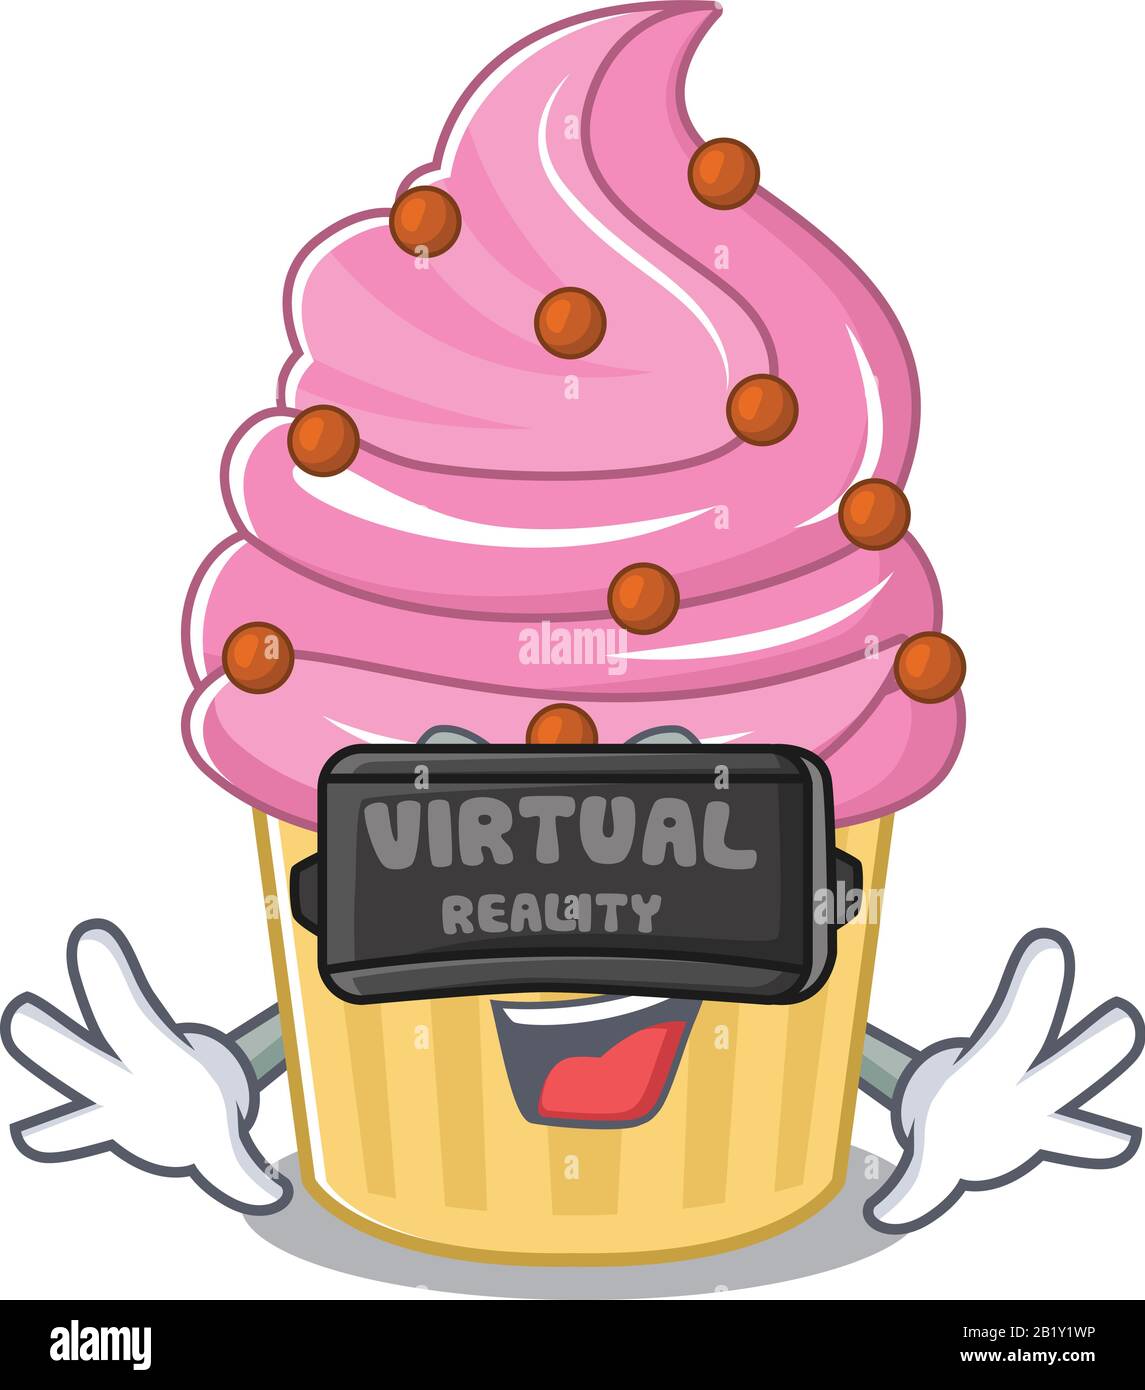 A Picture of strawberry cupcake character wearing Virtual reality headset Stock Vector